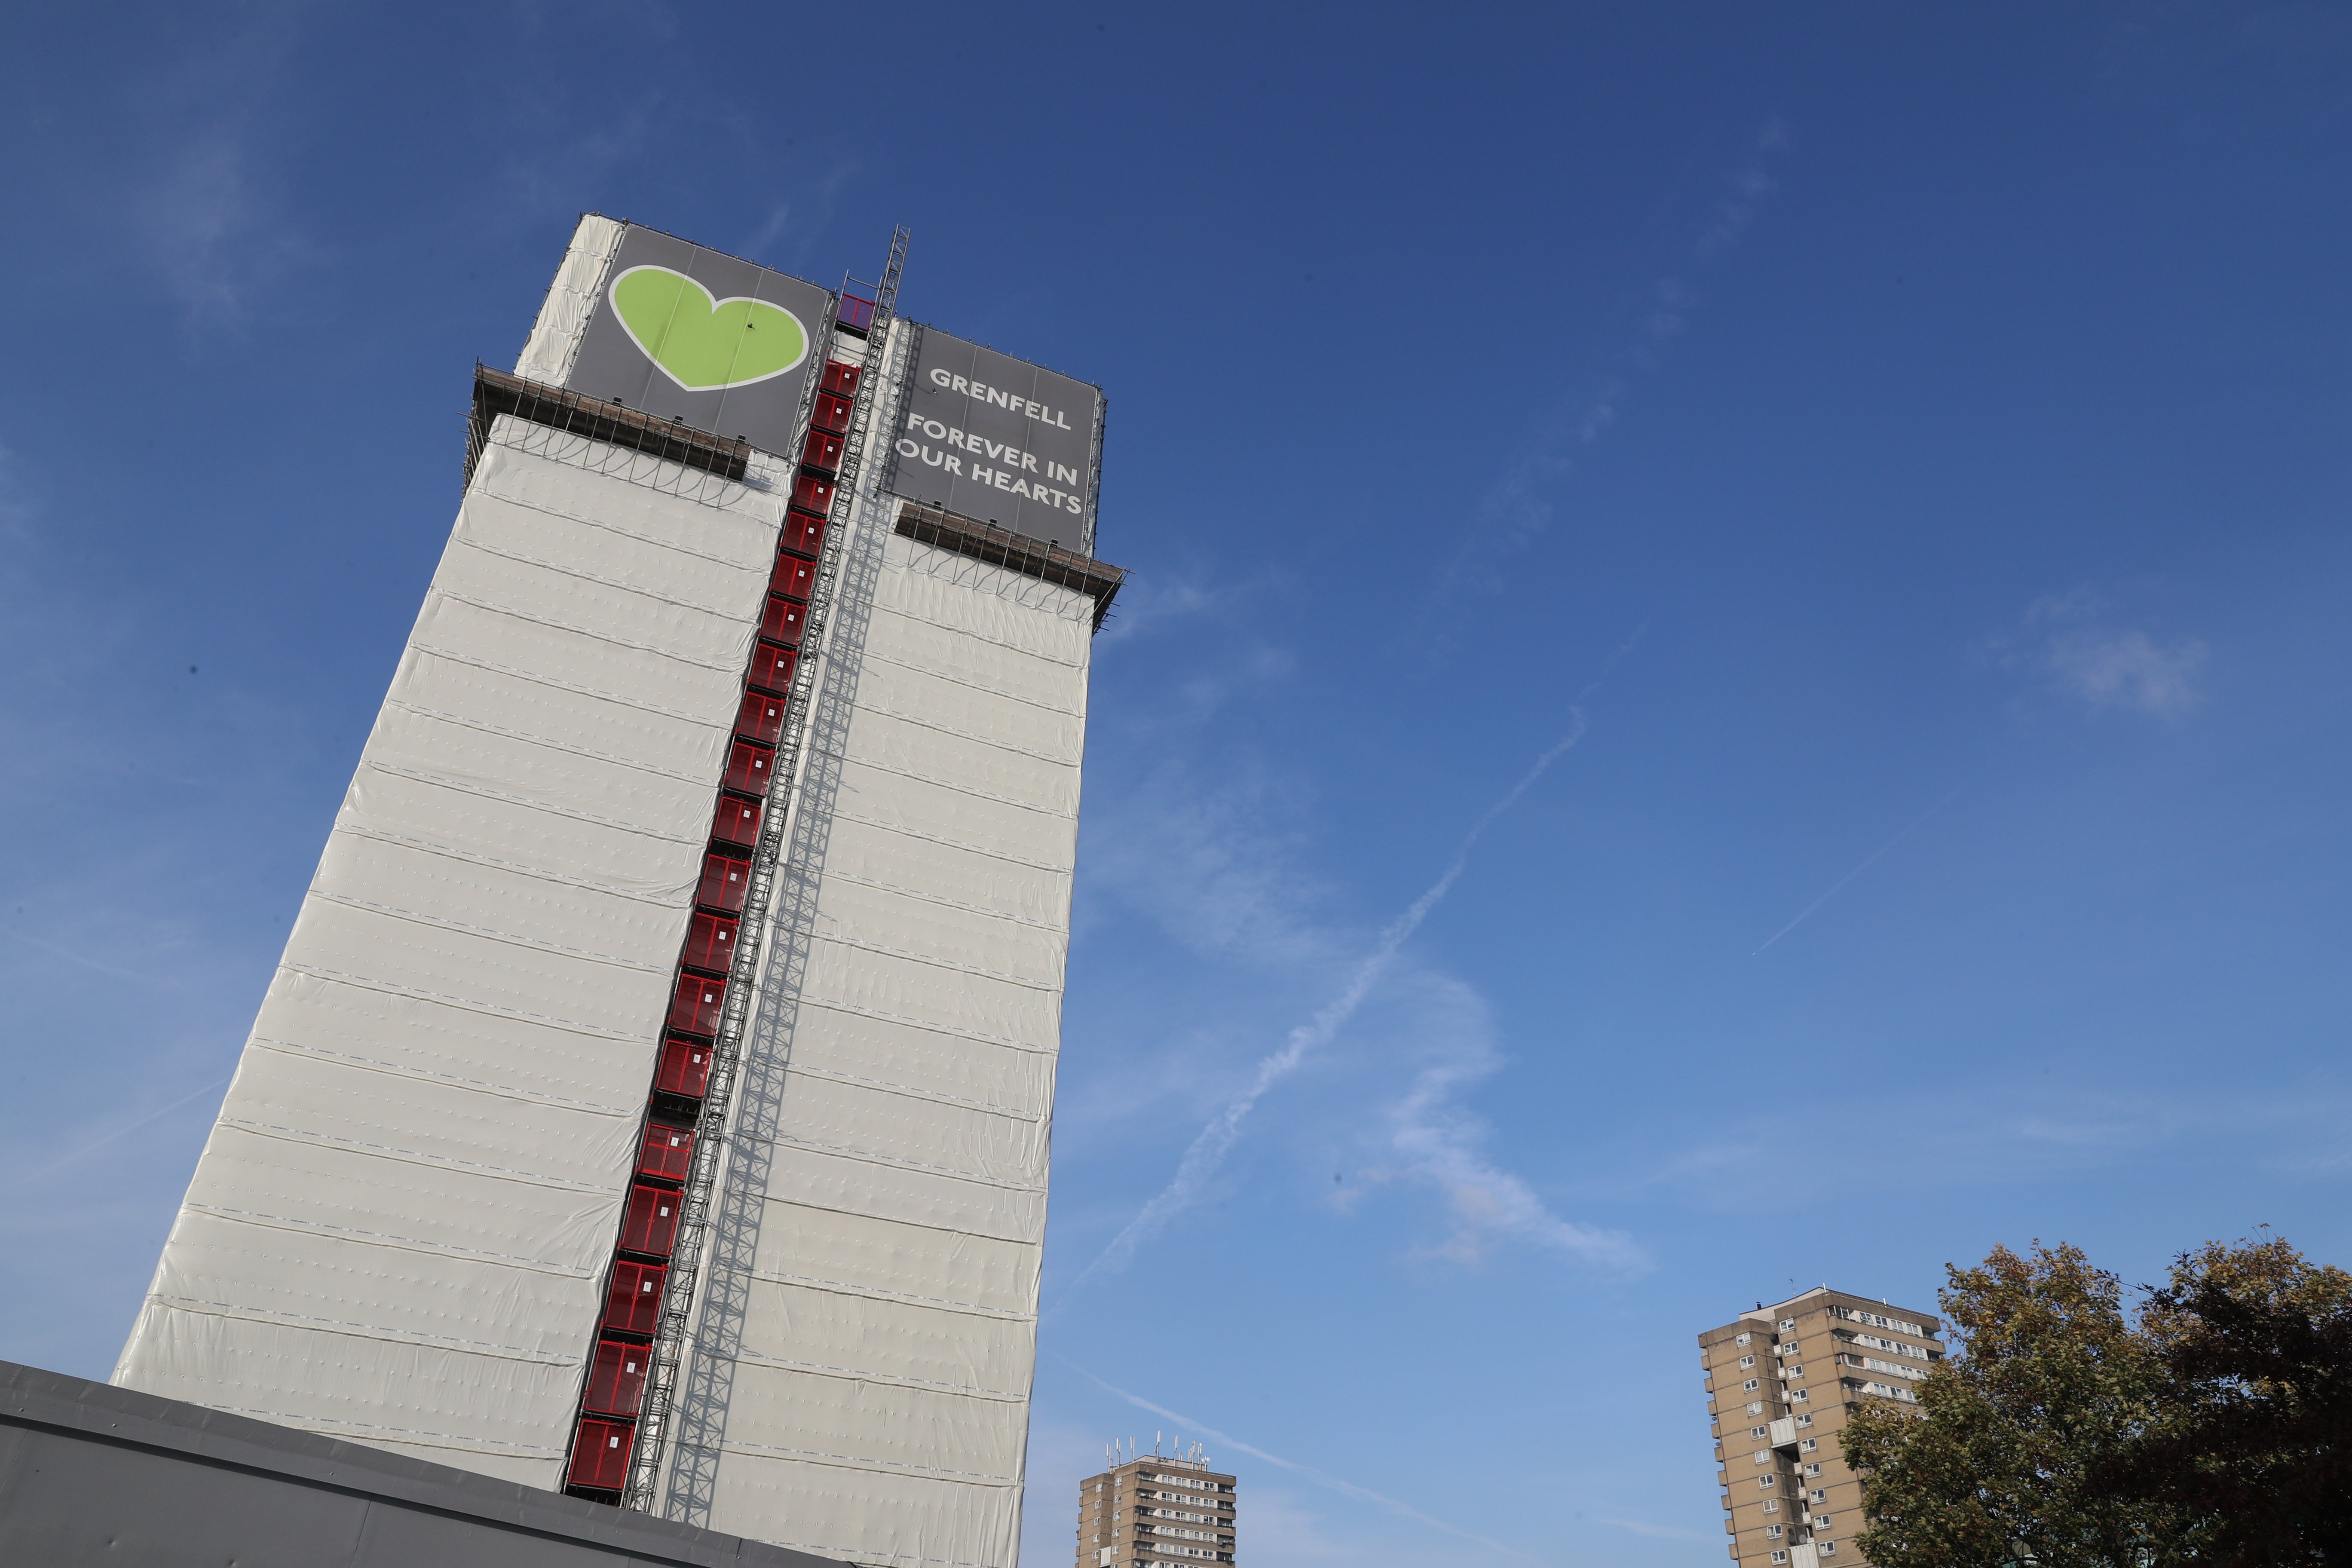 The Grenfell Tower inquiry is examining how the building came to be coated in flammable materials which contributed to the spread of flames (Steve Parsons/PA)